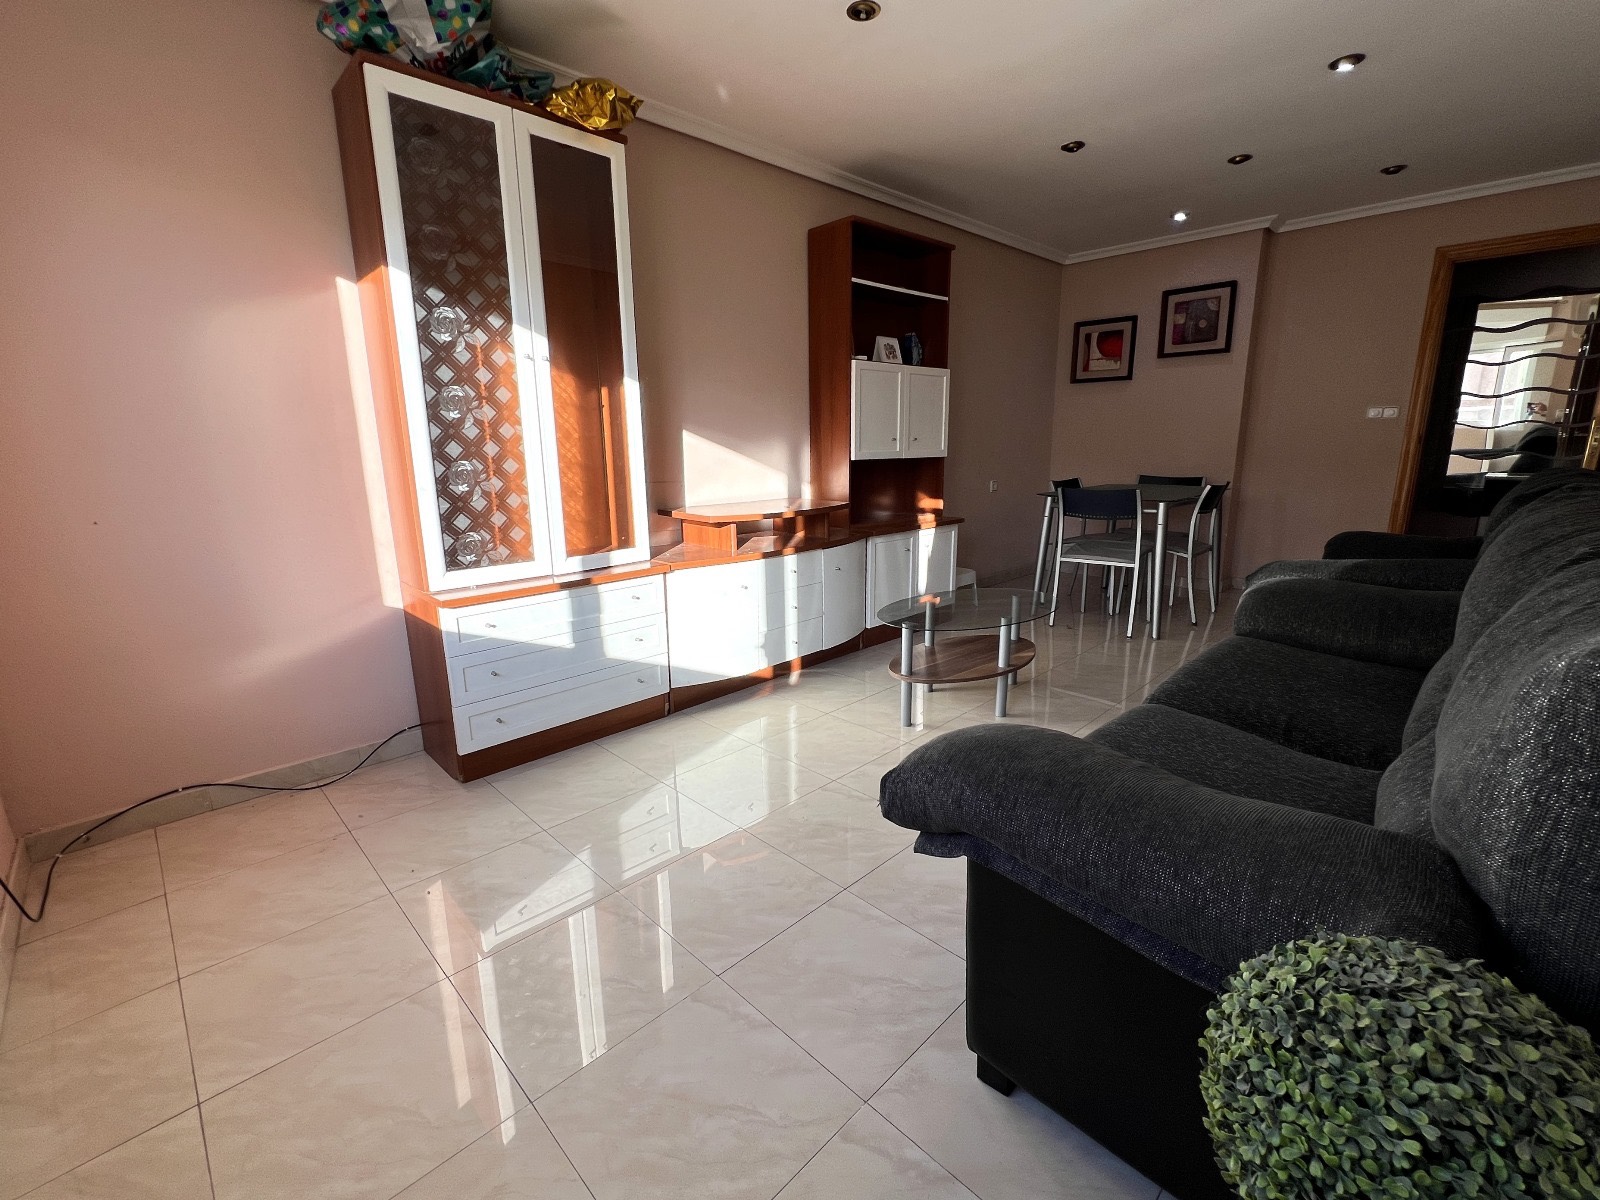 3 BED APARTMENT CLOSE TO THE SEA IN TORREVIEJA.